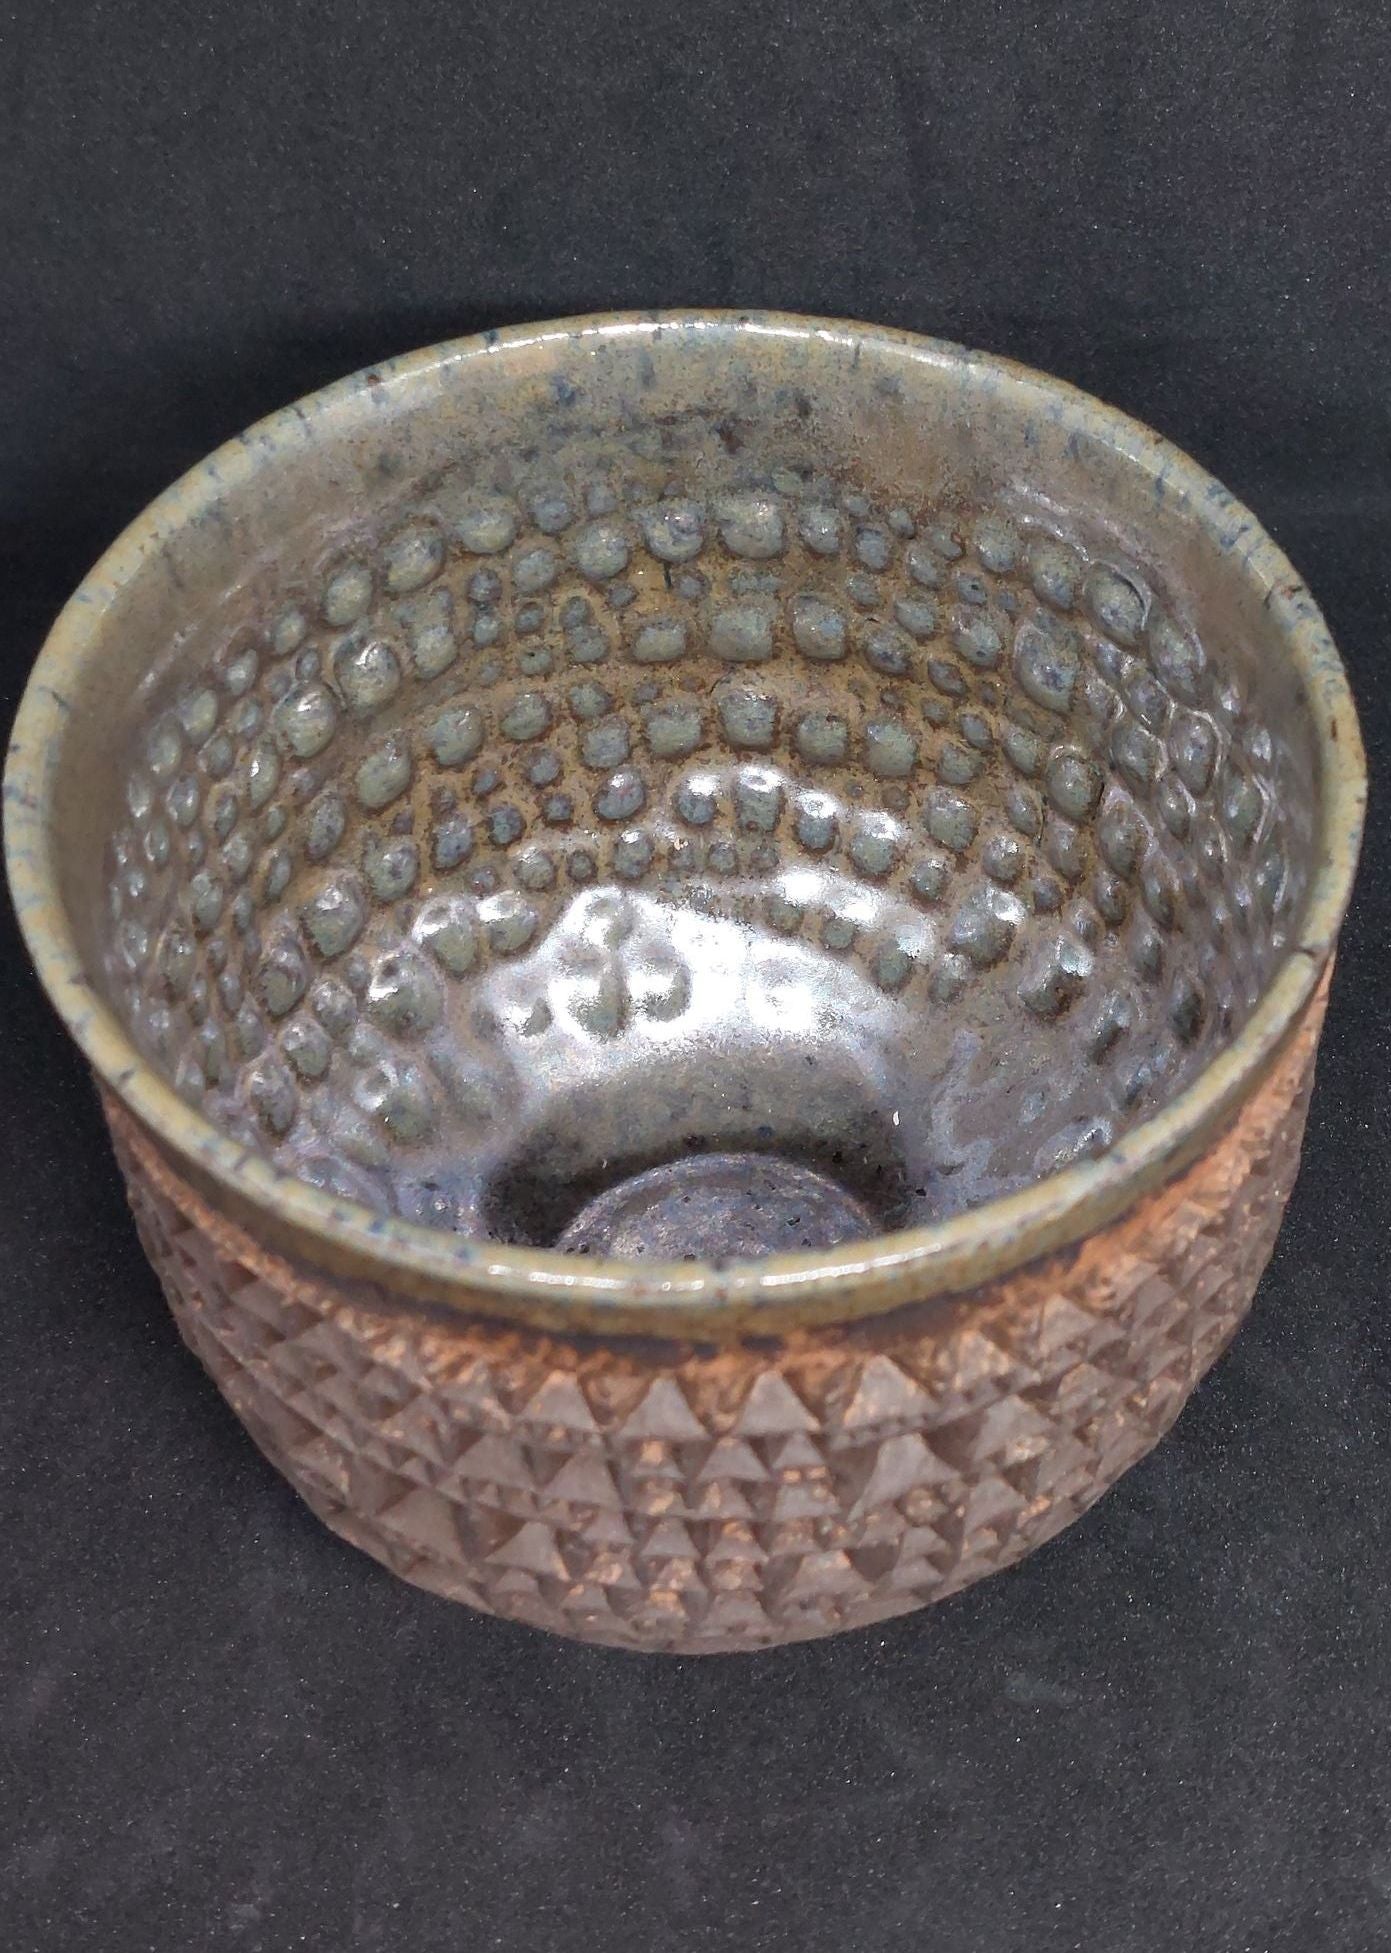 Black bowl on red and brown clay - Babel motif